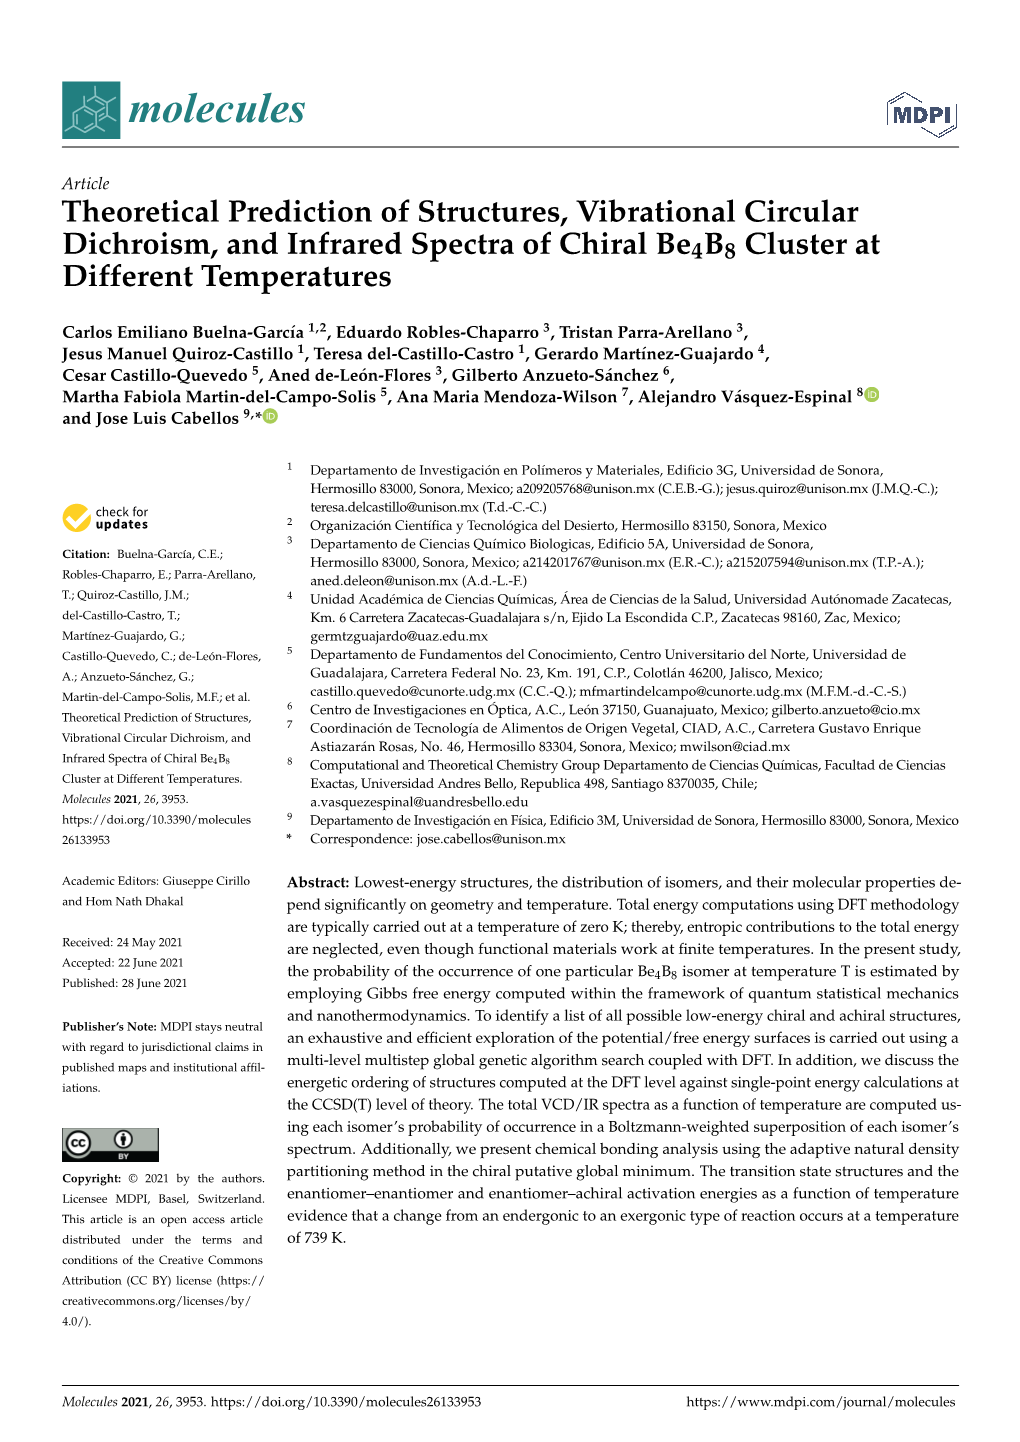 Theoretical Prediction of Structures, Vibrational Circular Dichroism, and Infrared Spectra of Chiral Be4b8 Cluster at Different Temperatures